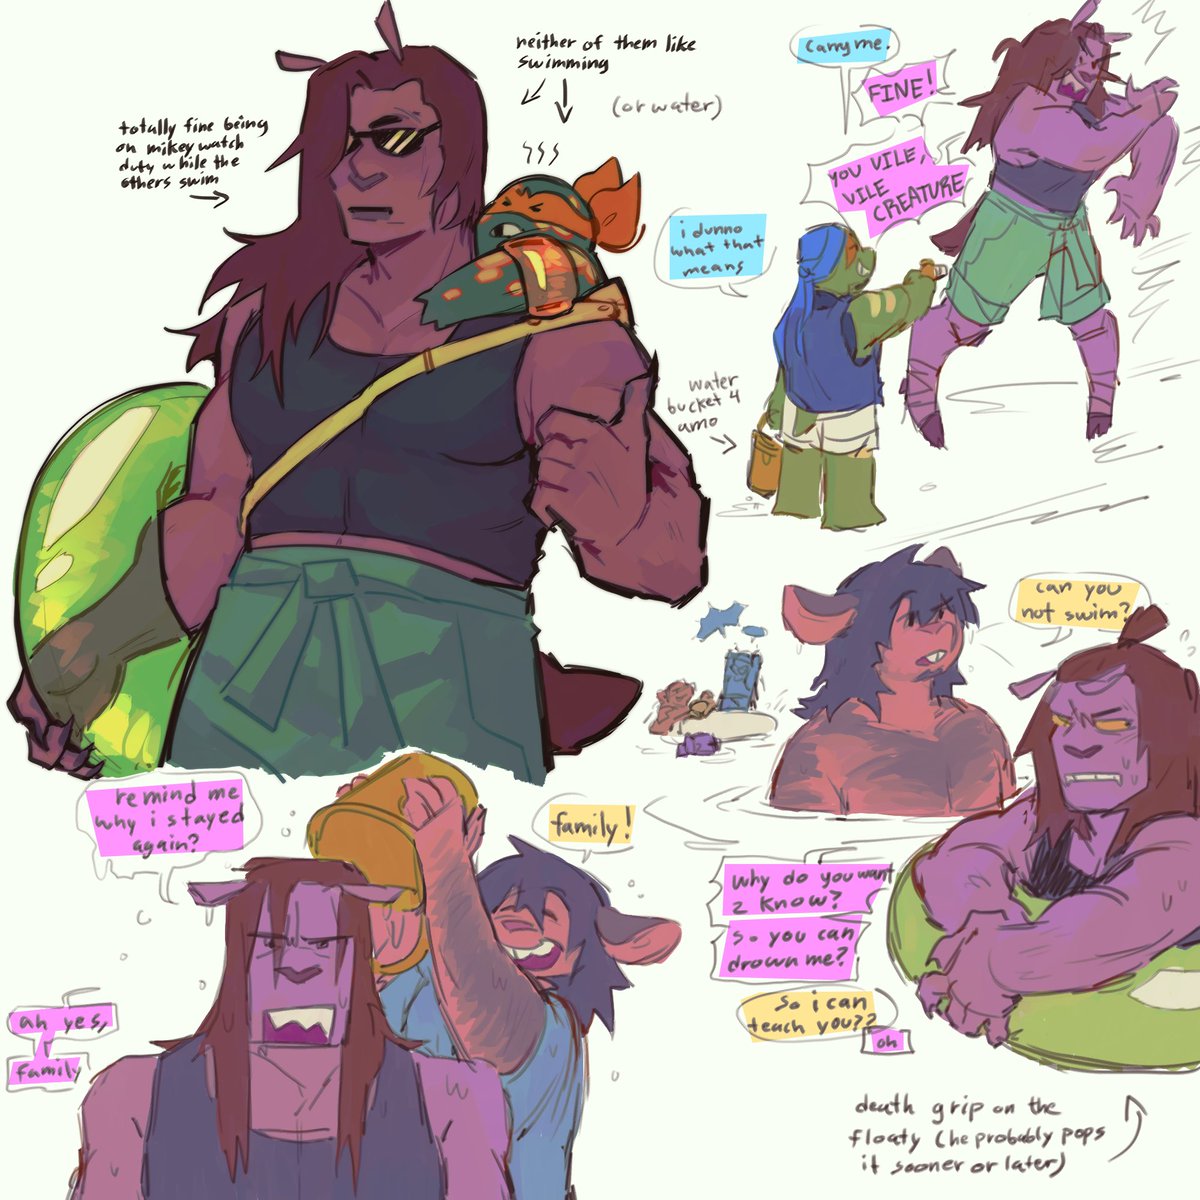 Swim day for the family!! (Drax hates water) #rottmnt 